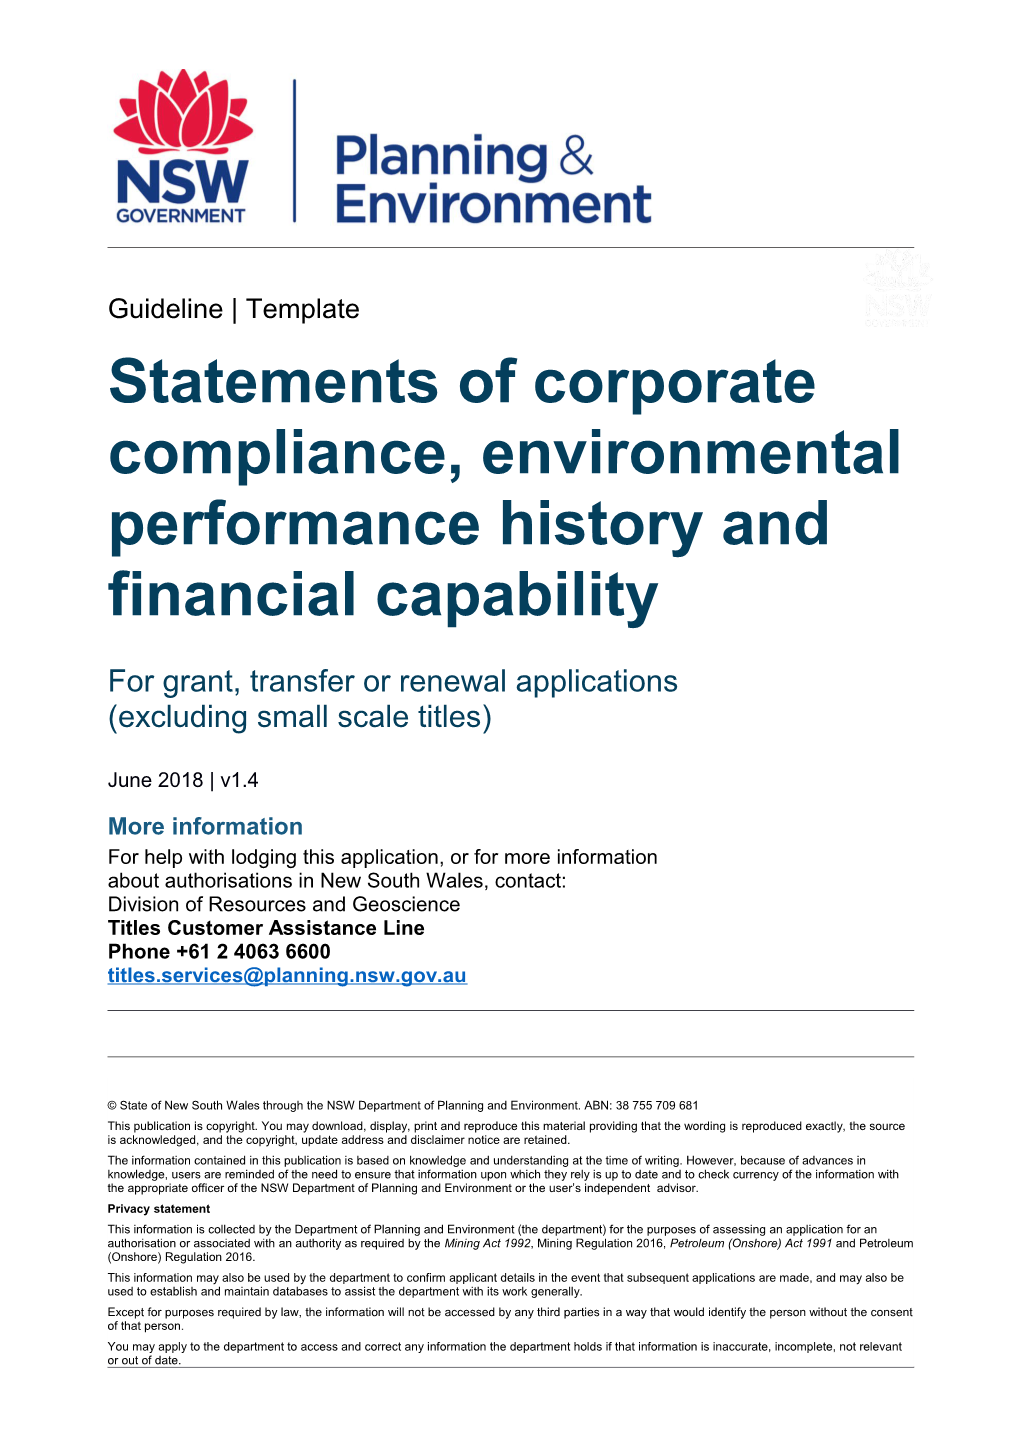 Statements of Corporate Compliance, Environmental Performance History and Financial Capability